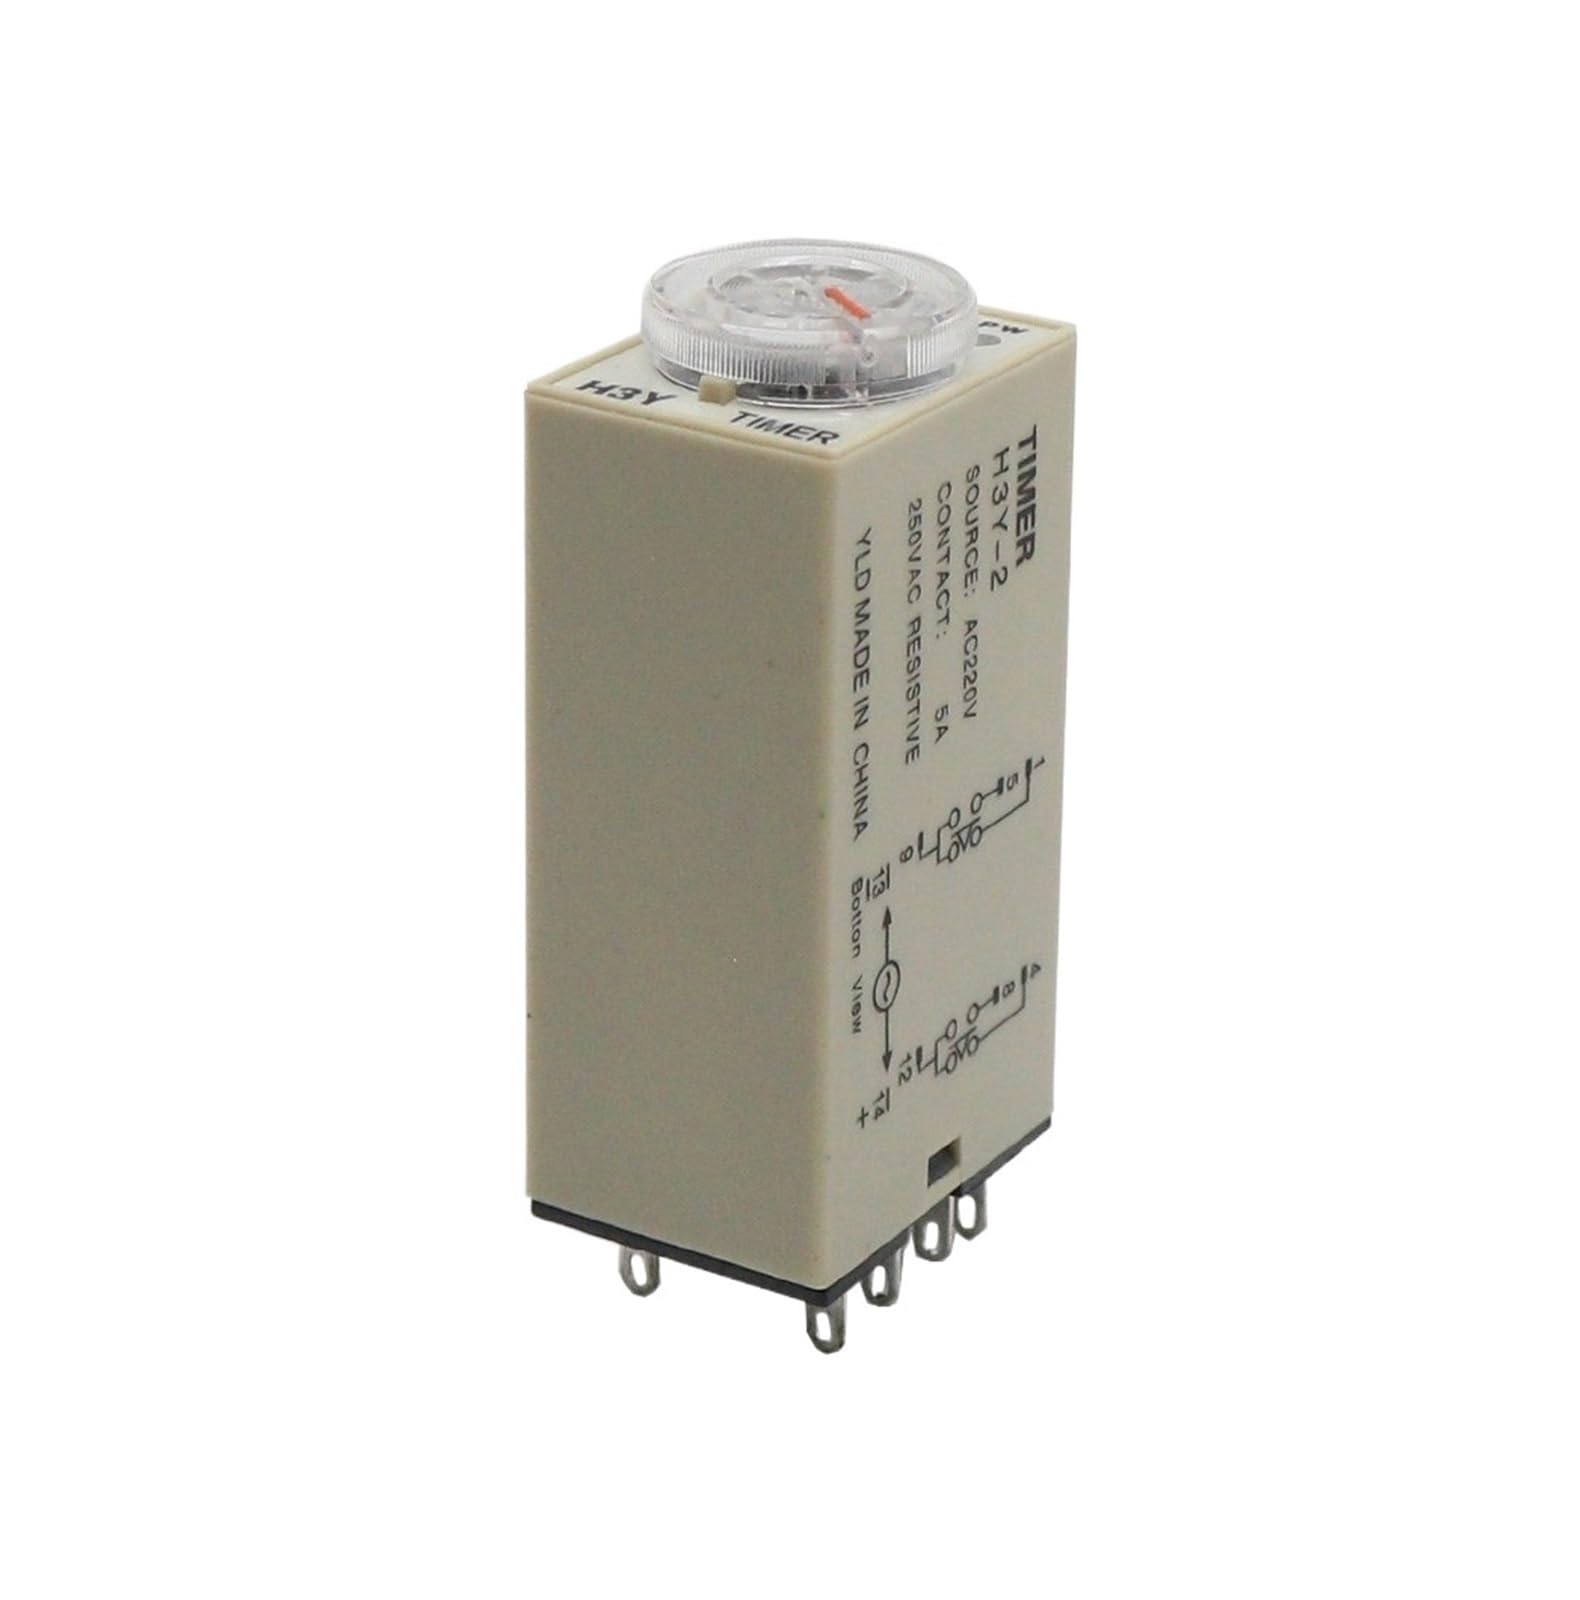 1pcs Power on Delay Time Relay H3Y-2 Small 8-pinDC12V24vAC220v Timer Switch 1S 3S 5S 30S 60S 5M 10M 30M 60M NWPNLXEA(AC 220V,H3Y-2 5Minute) von NWPNLXEA